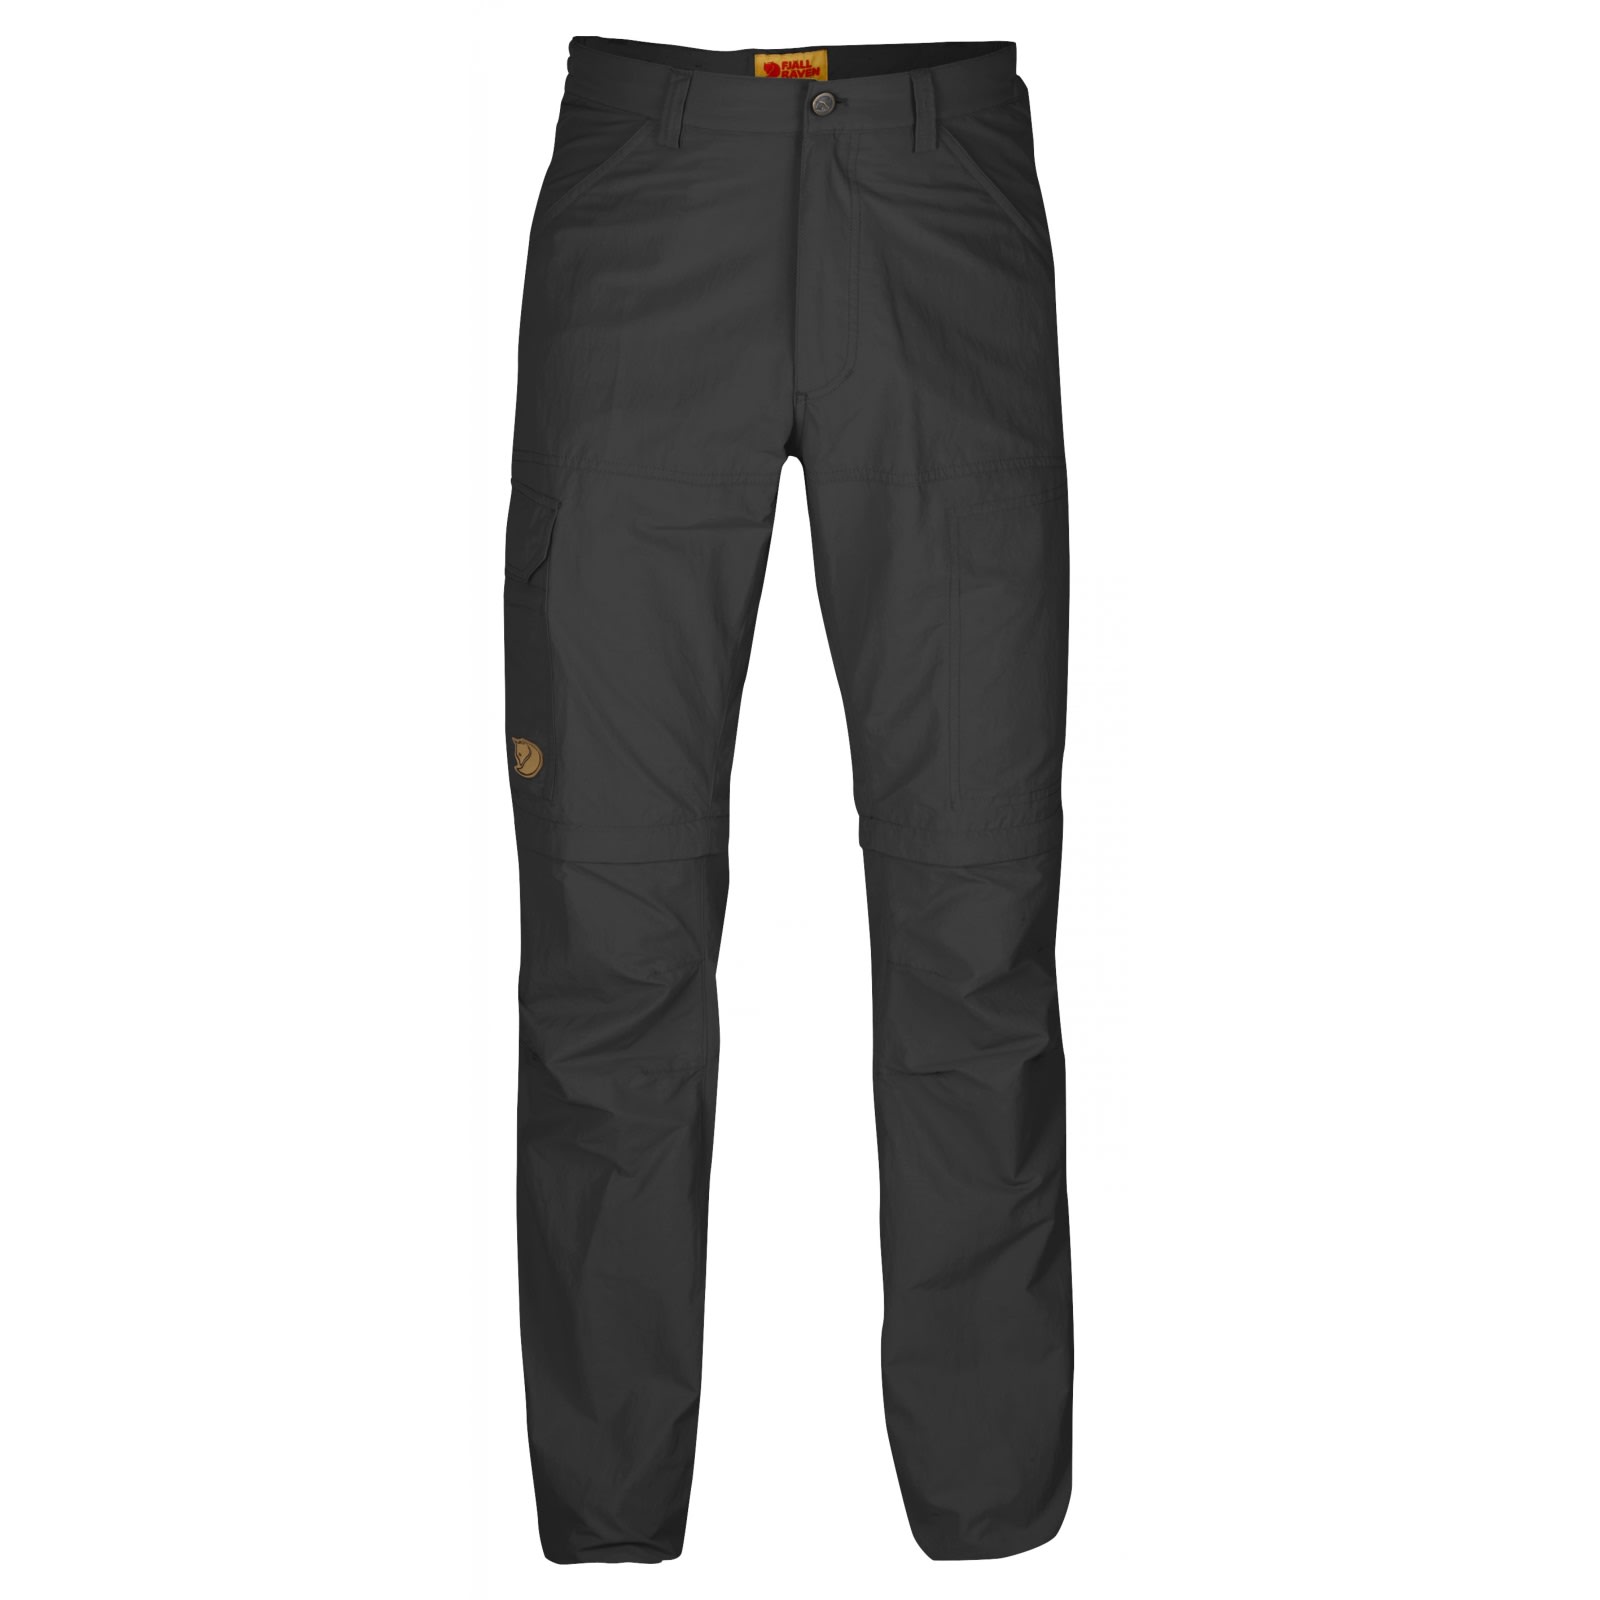 Buy Fjällräven Cape Point Zip-Off Trousers from Outnorth